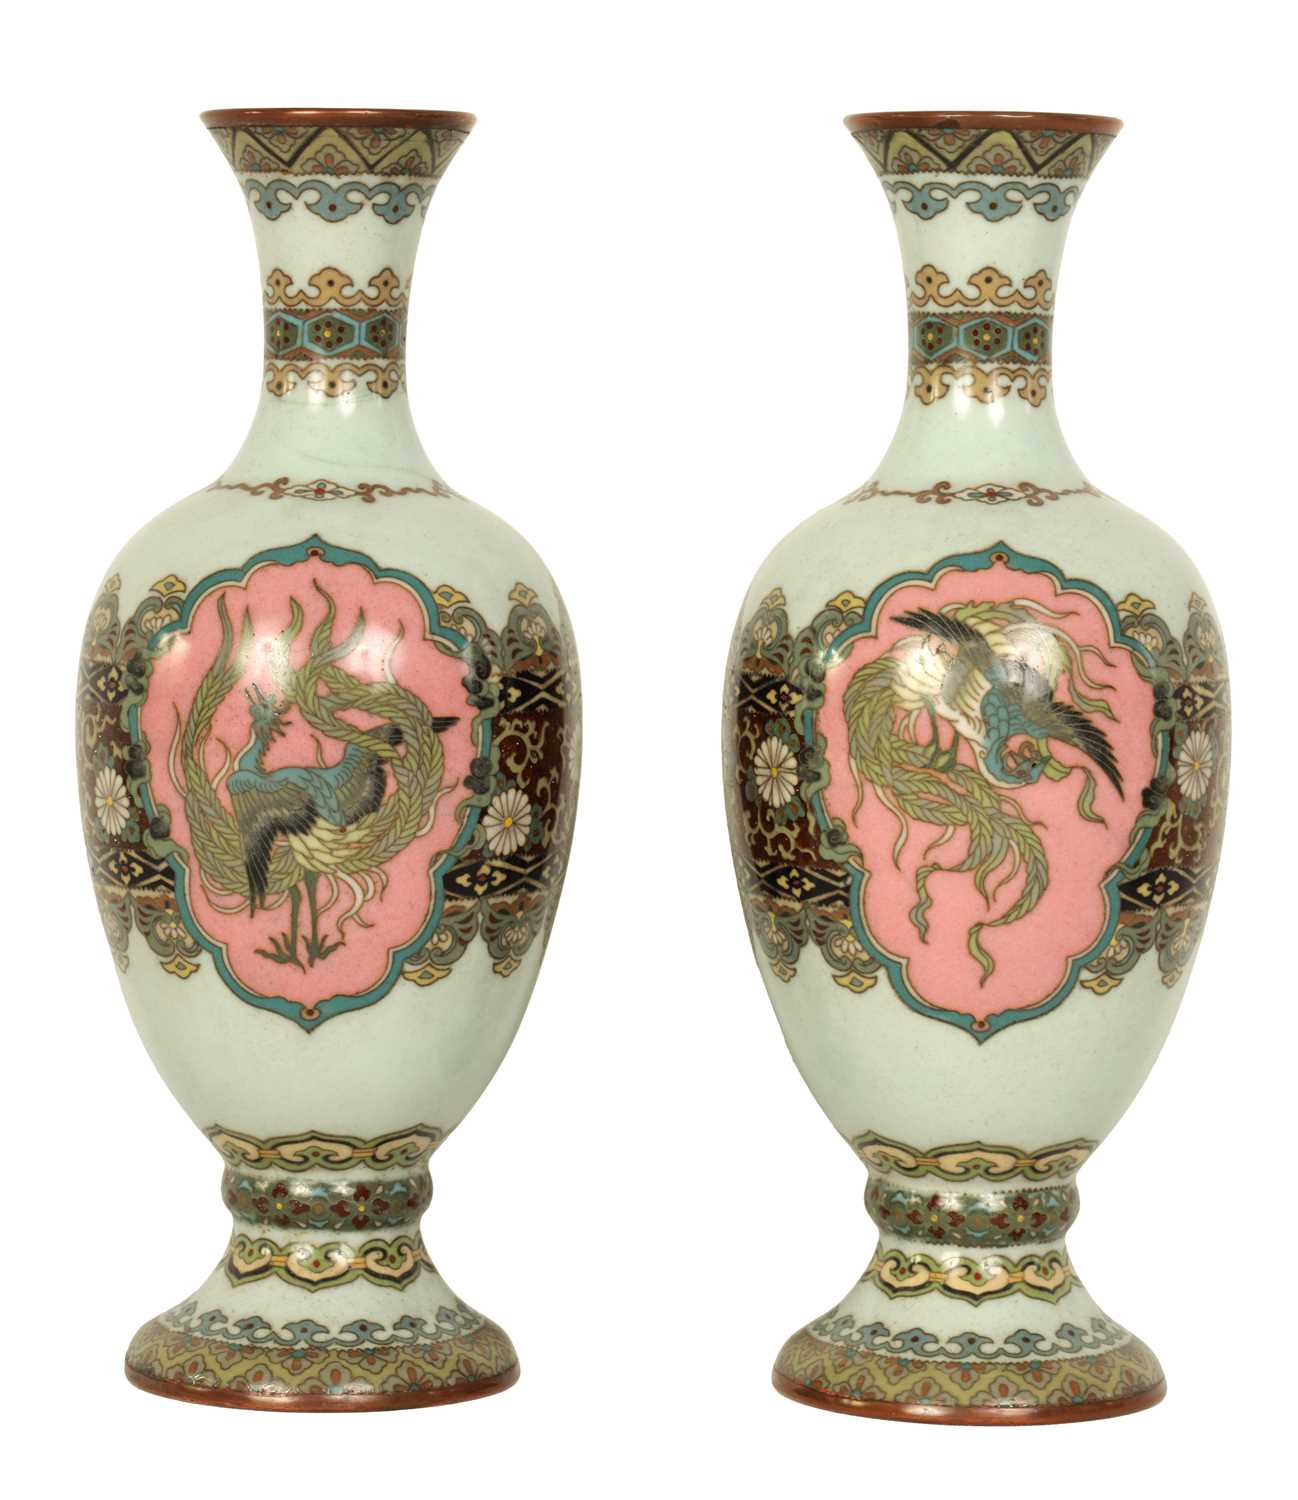 Lot 122 - A PAIR OF MEIJI PERIOD JAPANESE CLOISONNE VASES